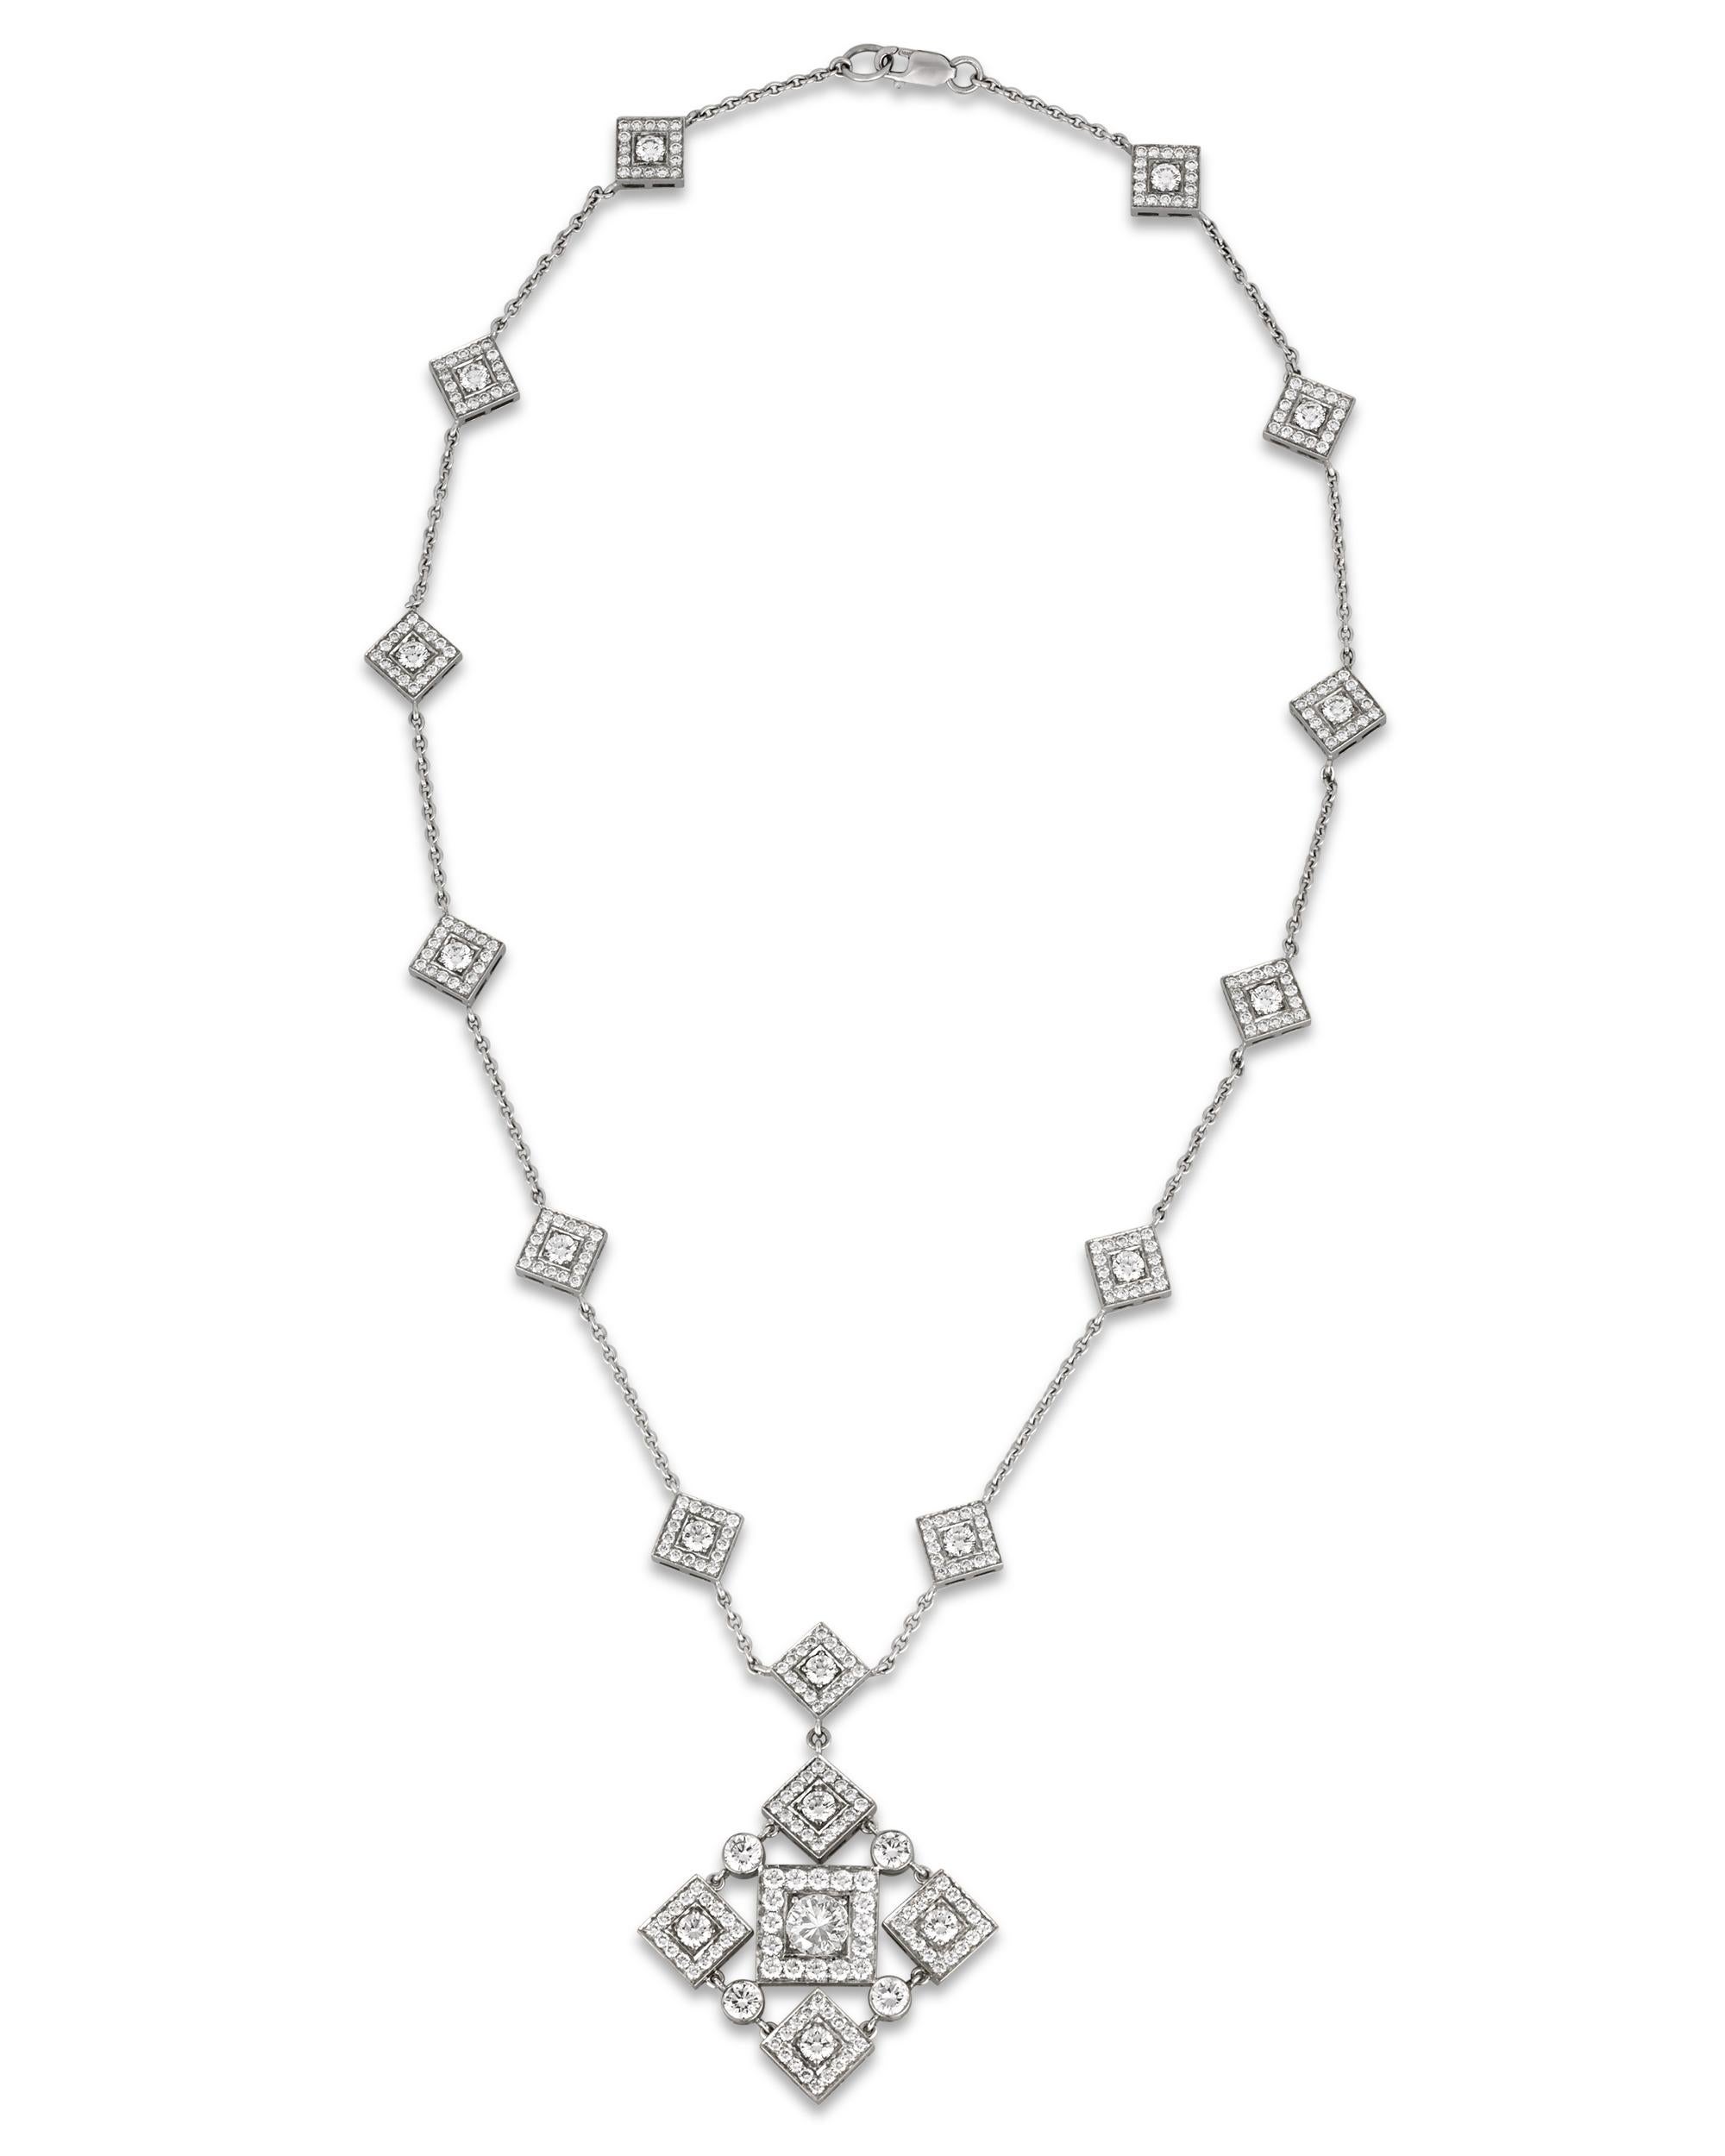 Dazzling white diamonds totaling 6.43 carats displaying coveted D-F color and VS clarity are arranged in a stunning geometric pattern in this pendant necklace. Set in platinum.

Pendant: 2